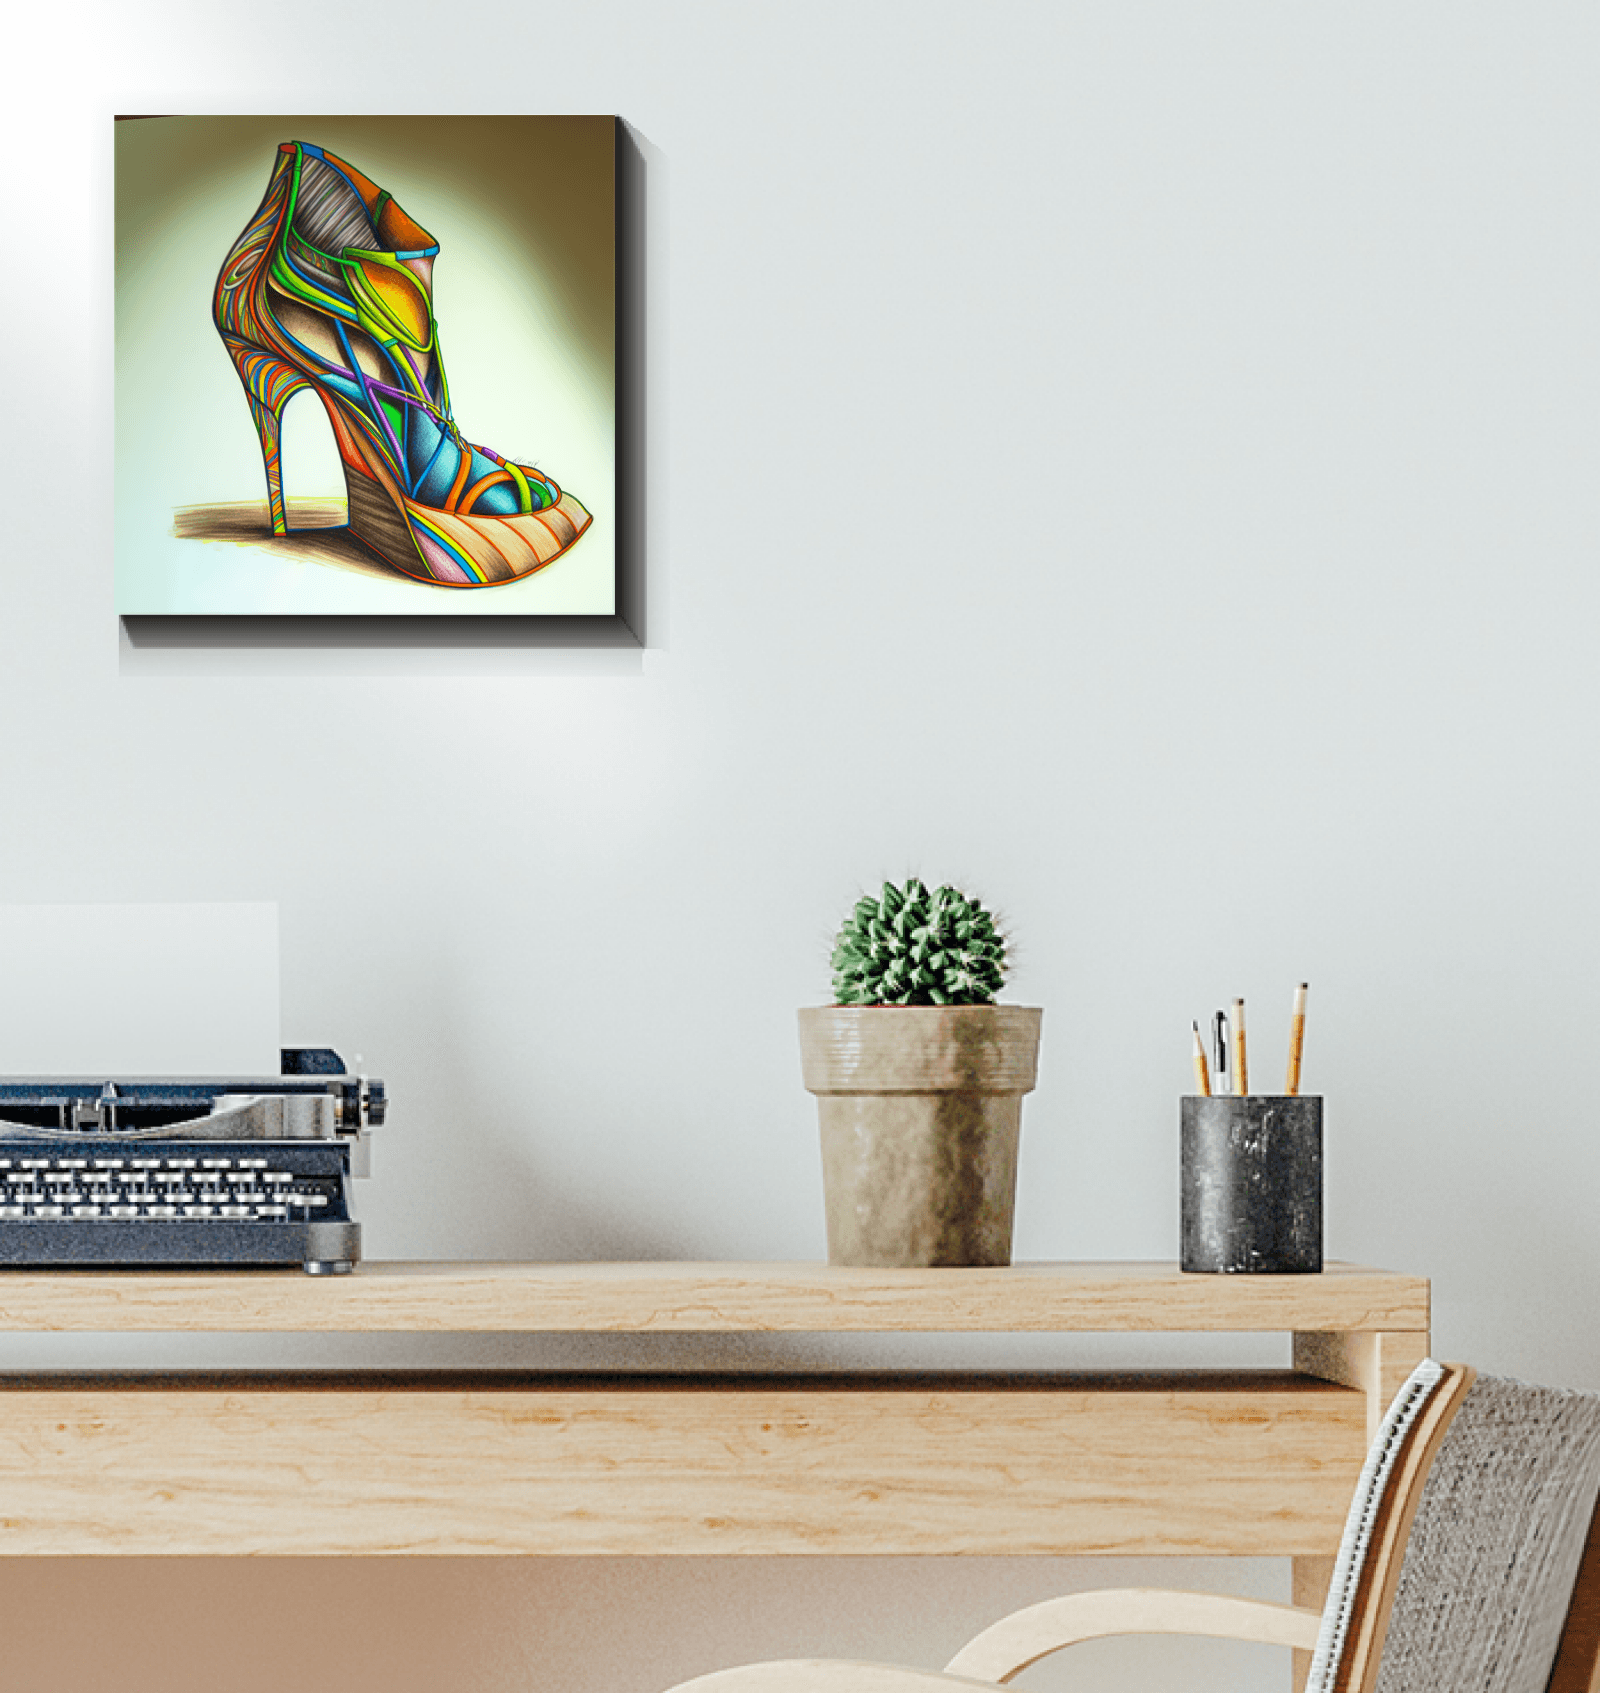 Discovering the Unseen - Futuristic Shoe Art - Beyond T-shirts